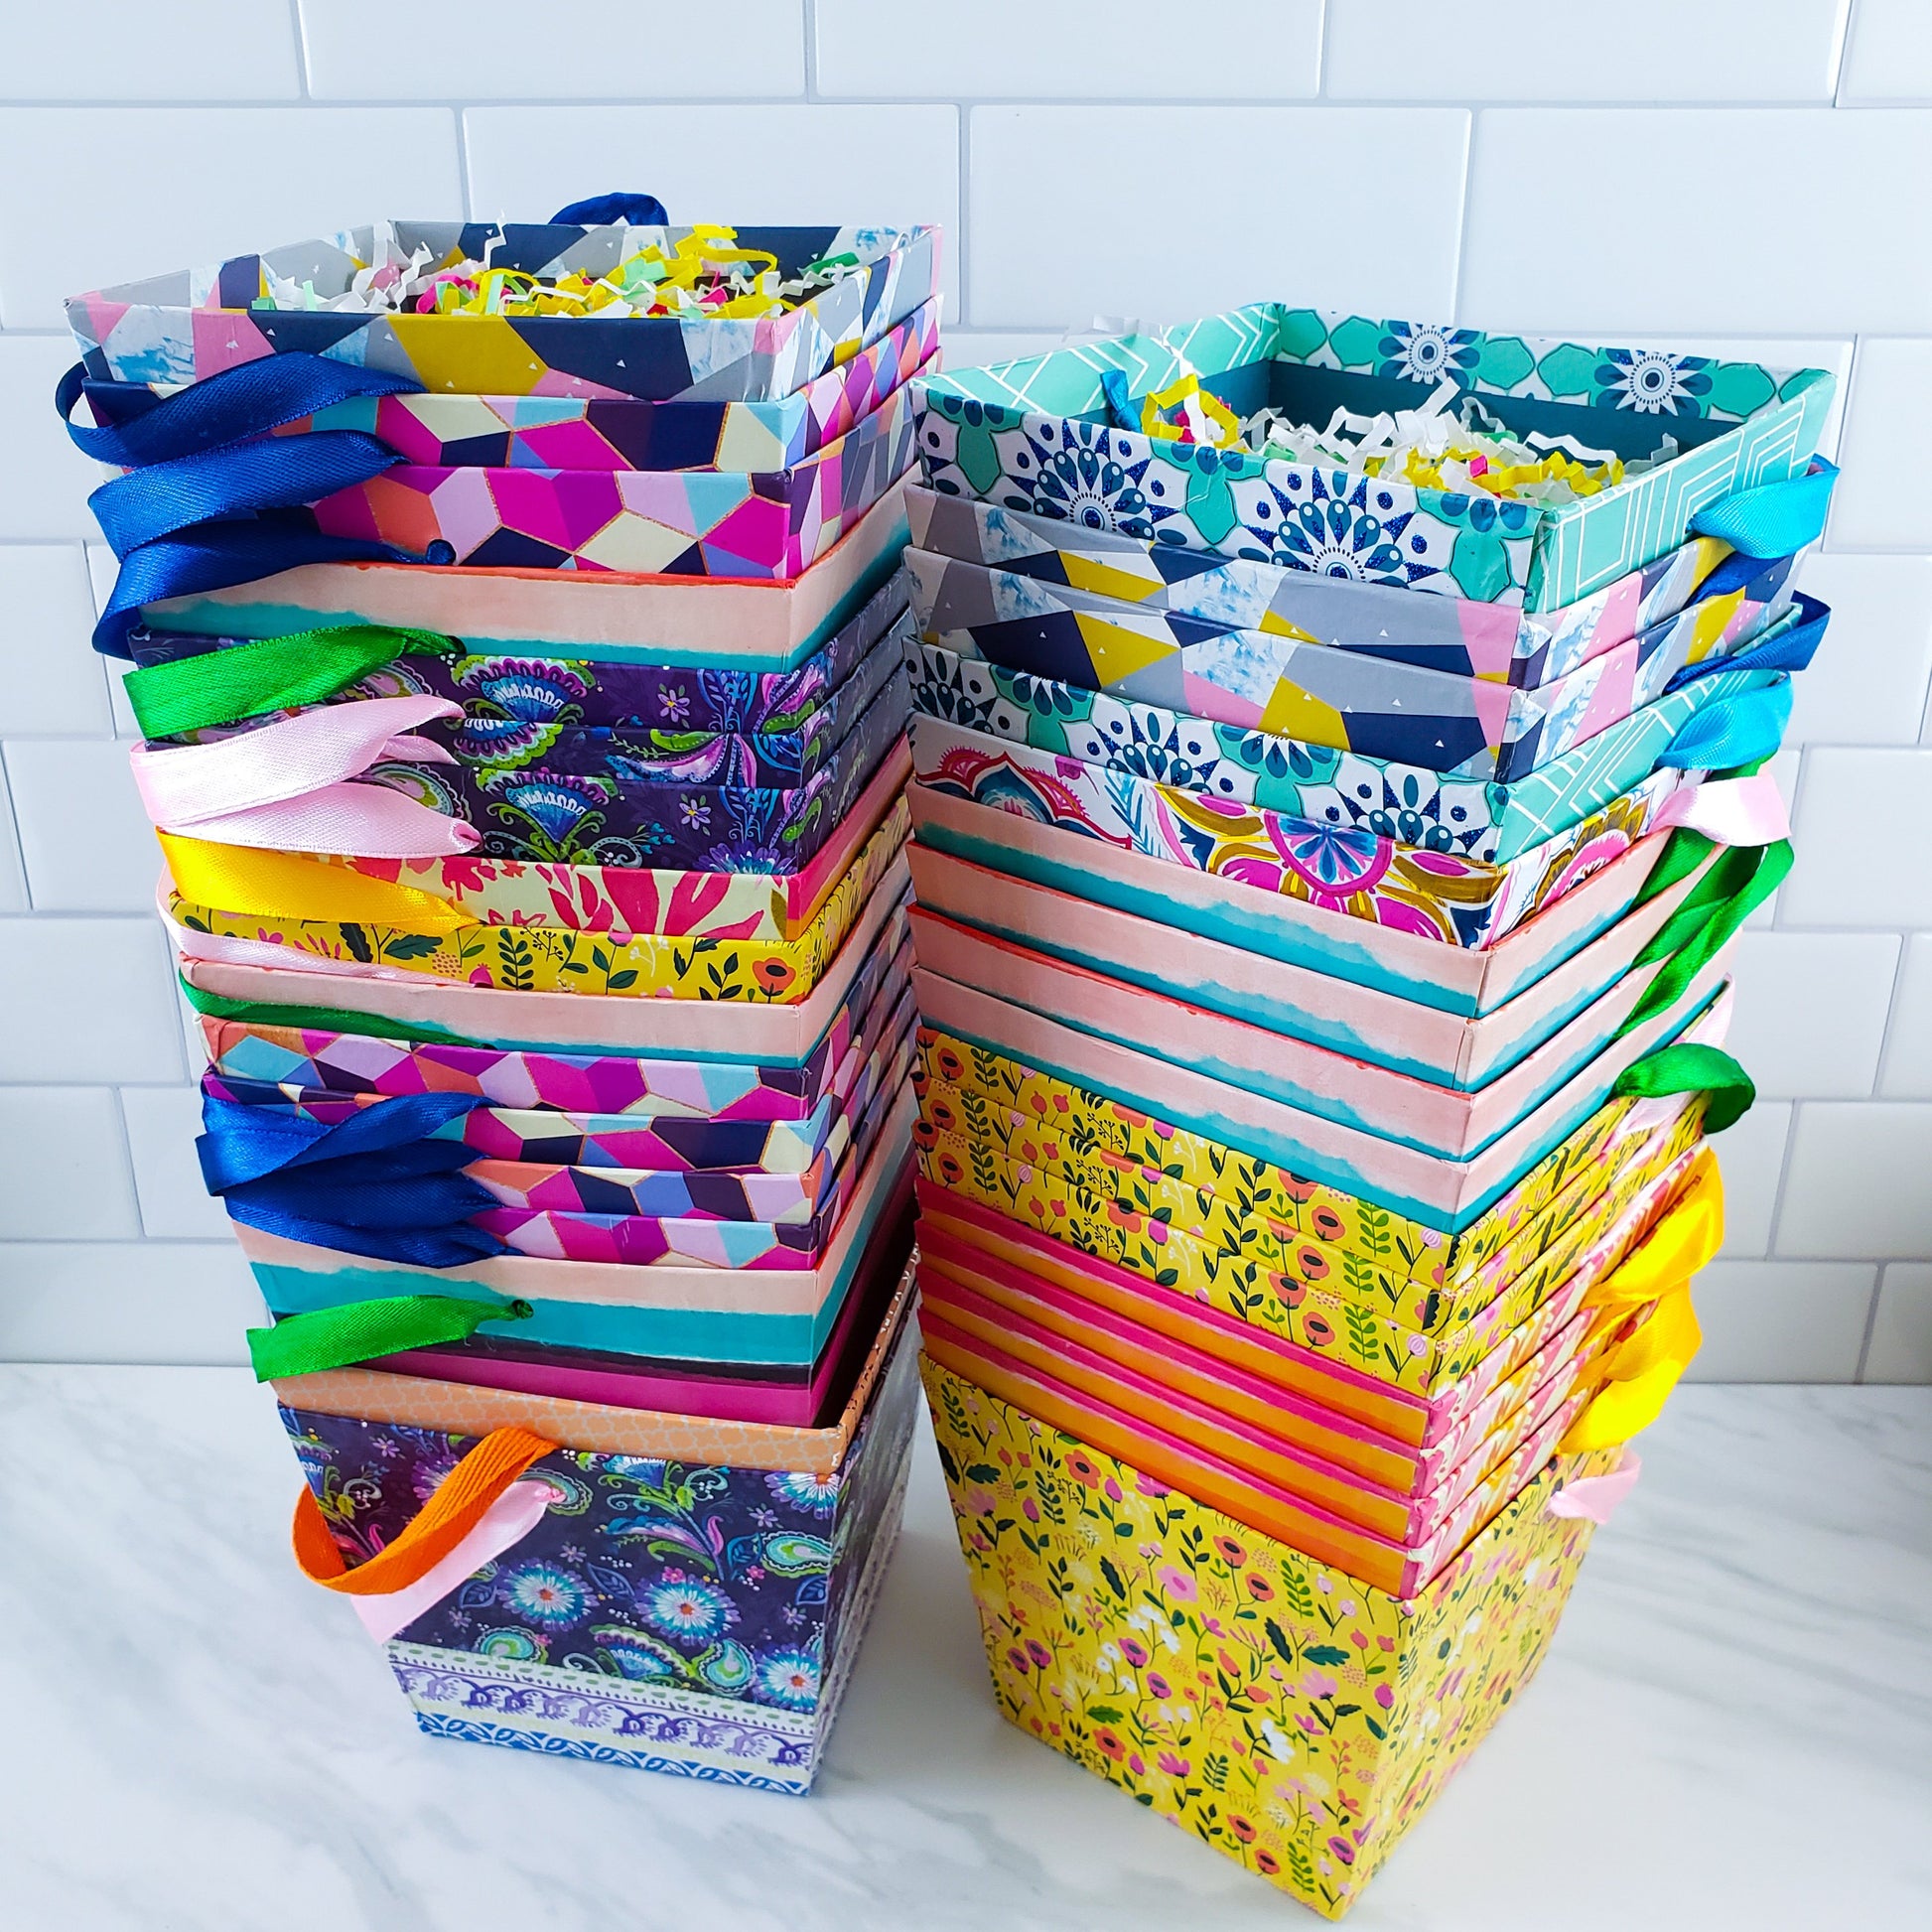 stacks of colorful gift boxes